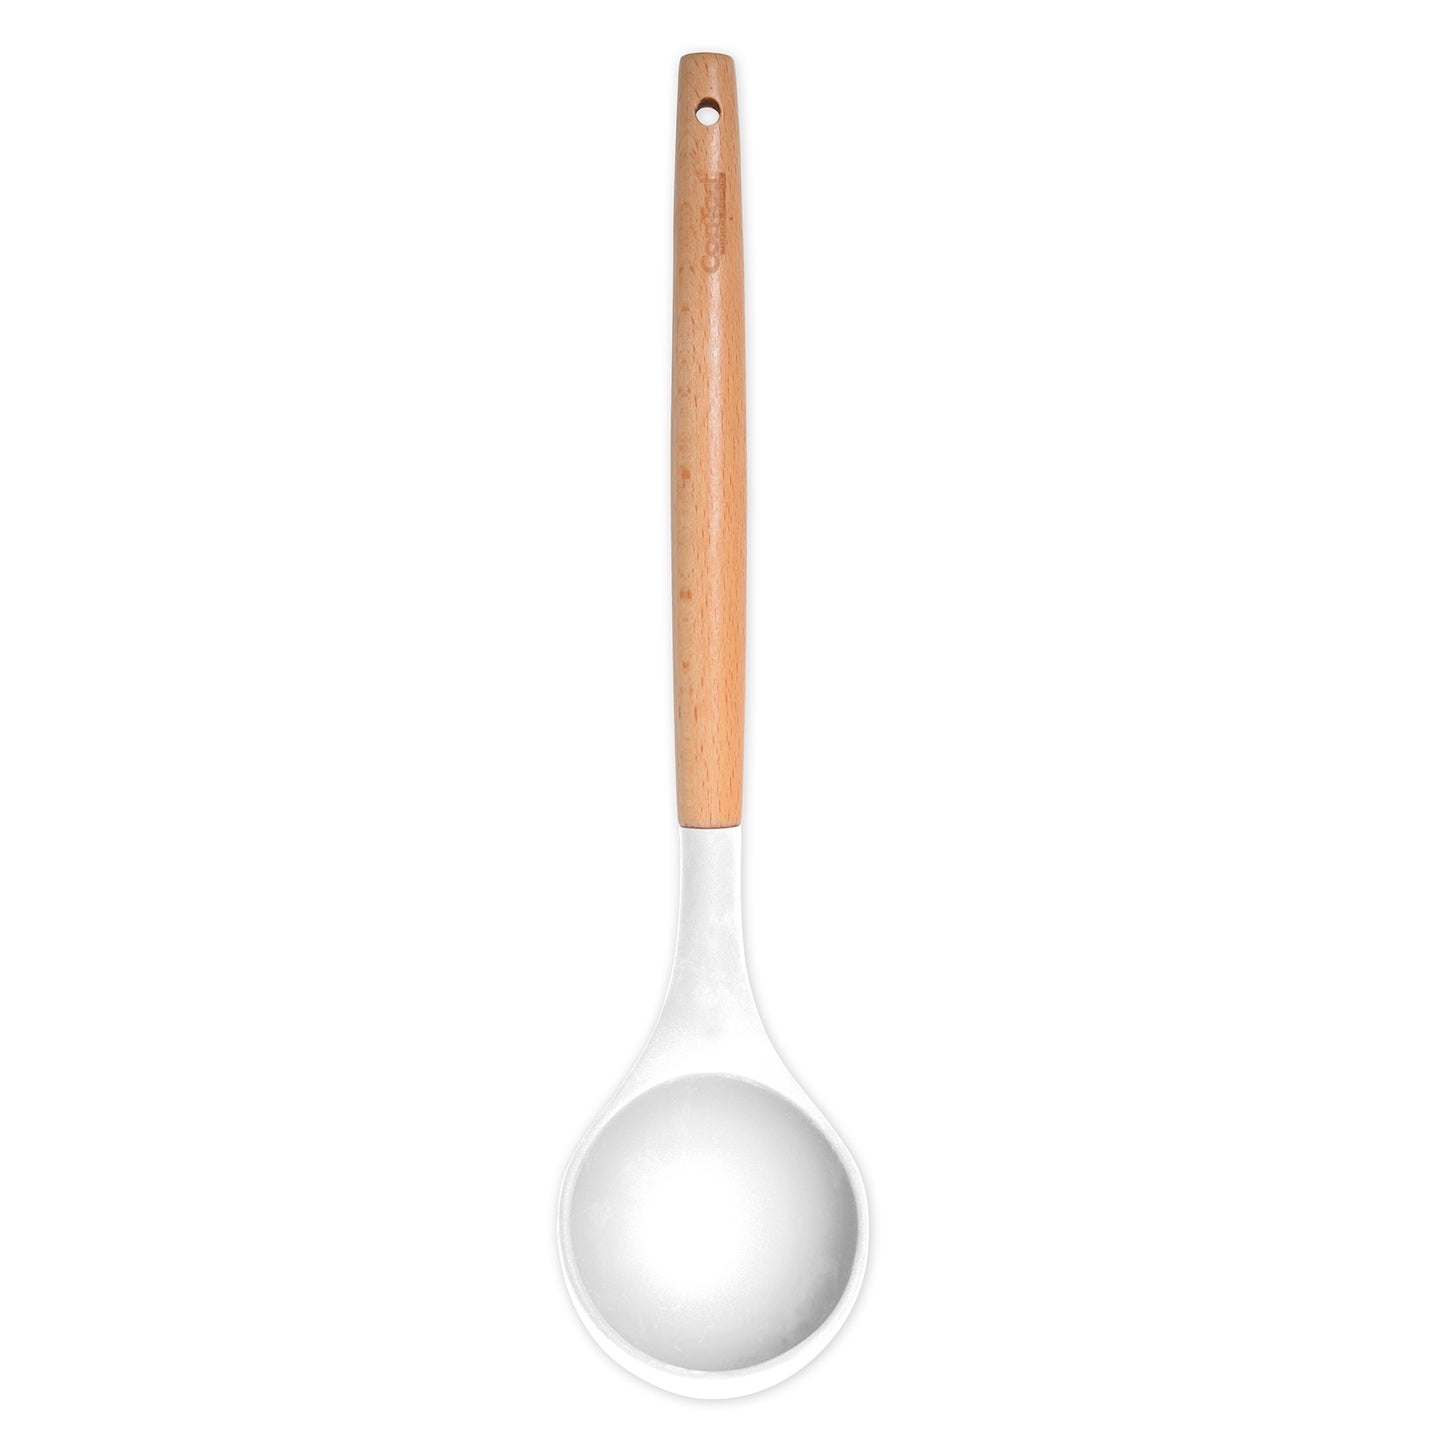 Silicone Utensils with Beech Wood Handles - White